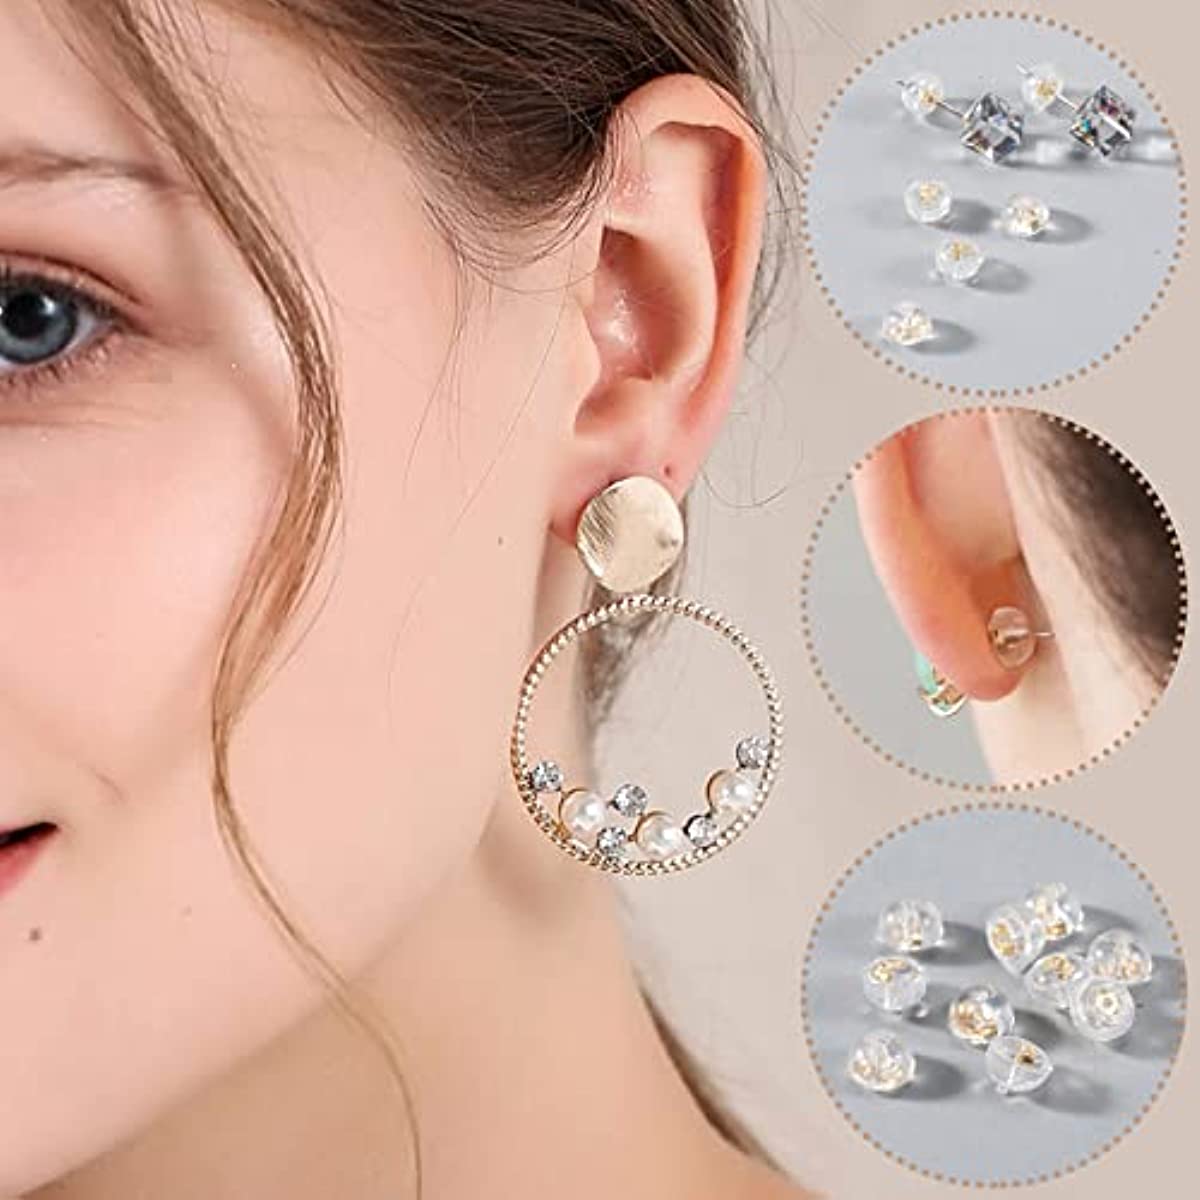 Silicone Earring Backings, Hypoallergenic Clip On Earring Backs